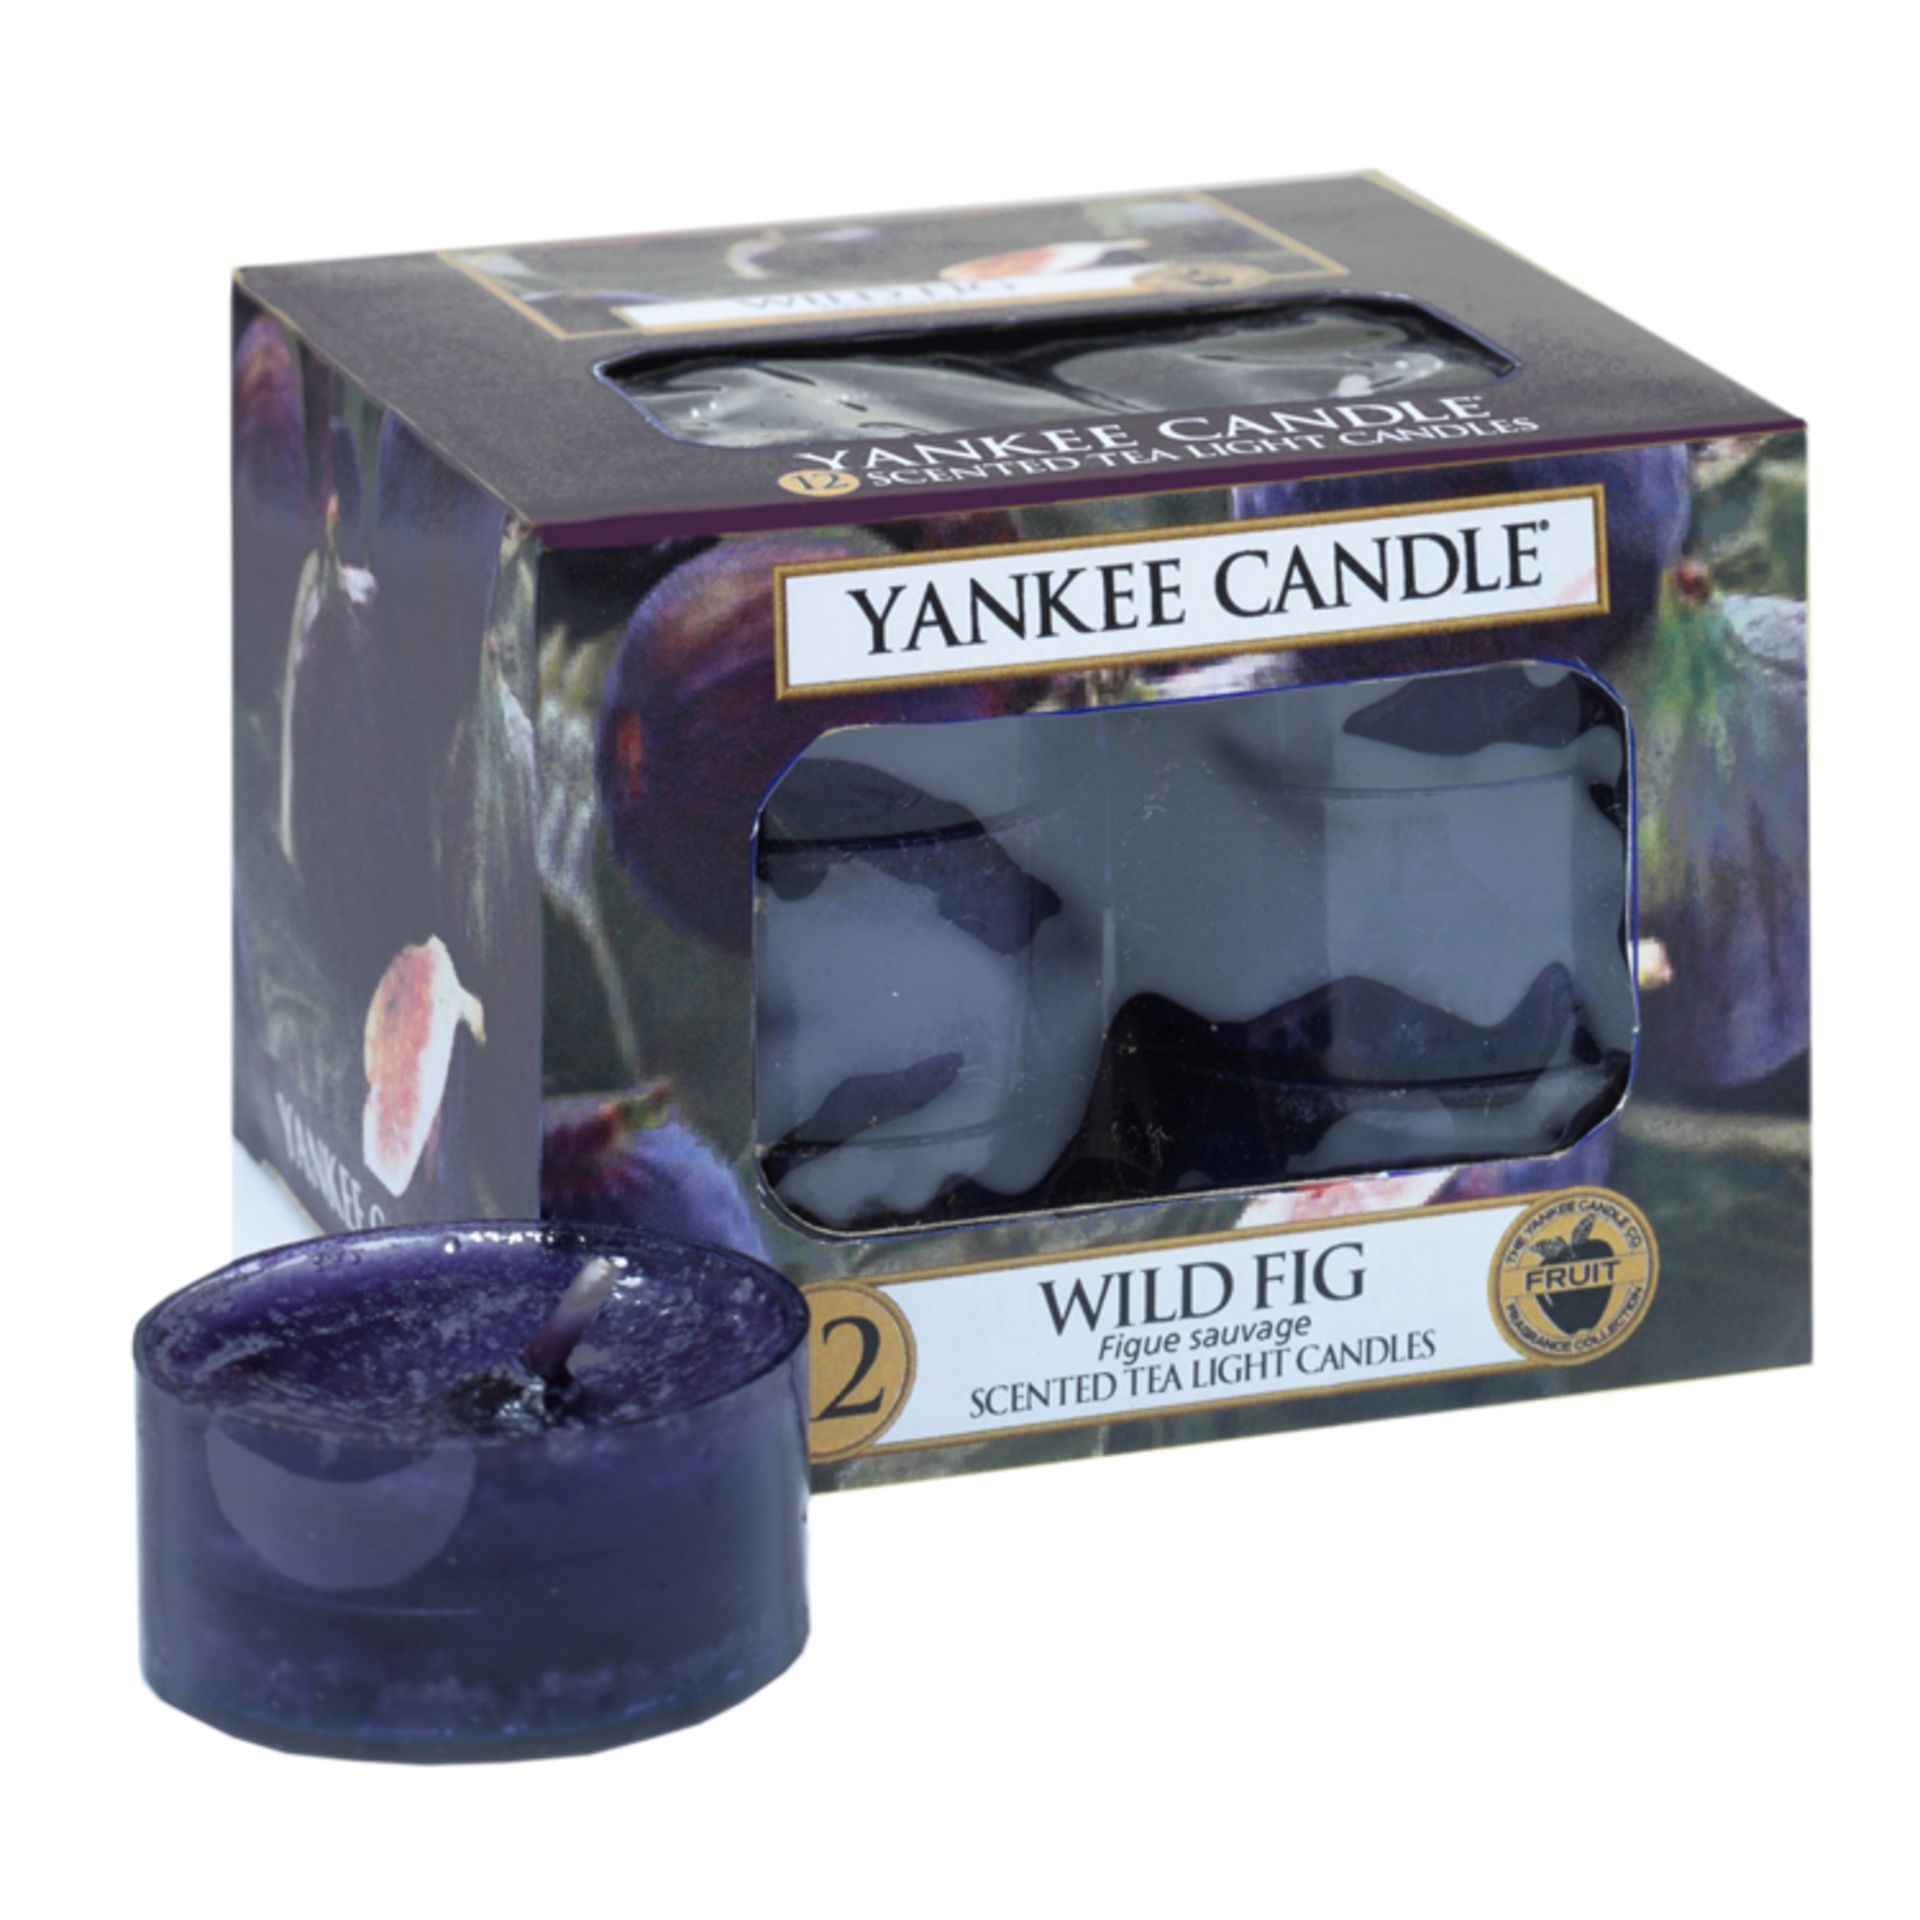 V Brand New 12 Yankee Candle Scented Tea Light Candles Wild Fig eBay Price £7.75 X 2 YOUR BID